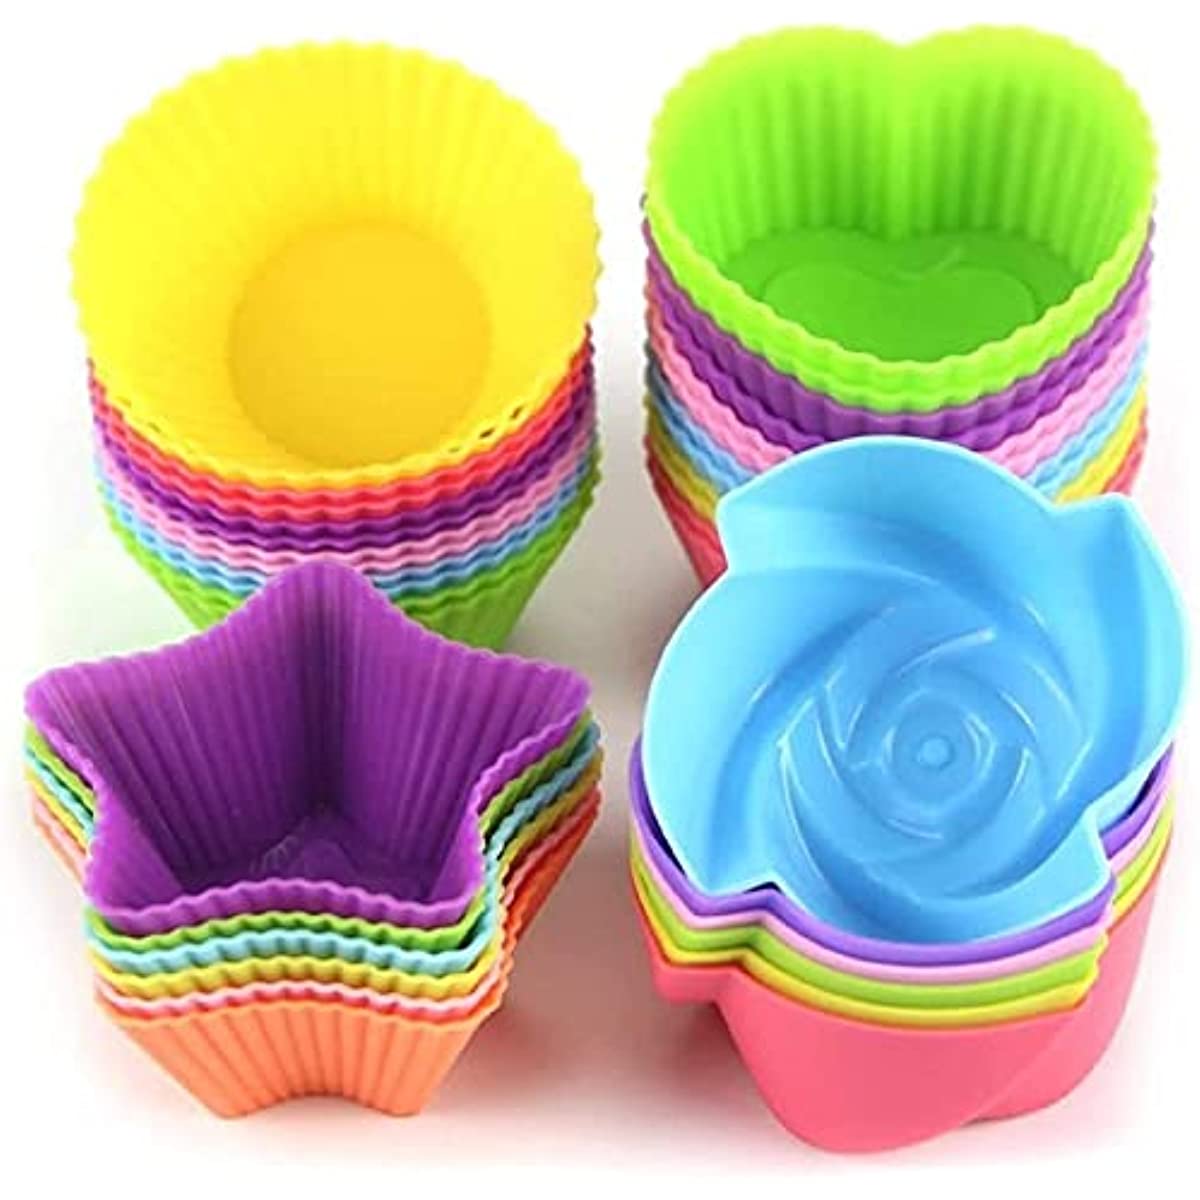 

24pcs, Colorful Silicone Muffin Cups - Non-stick Reusable Cupcake Liners In Round, Star, Heart, And Flower Shapes - Perfect For Baking And Decorating - Kitchen Gadgets And Accessories